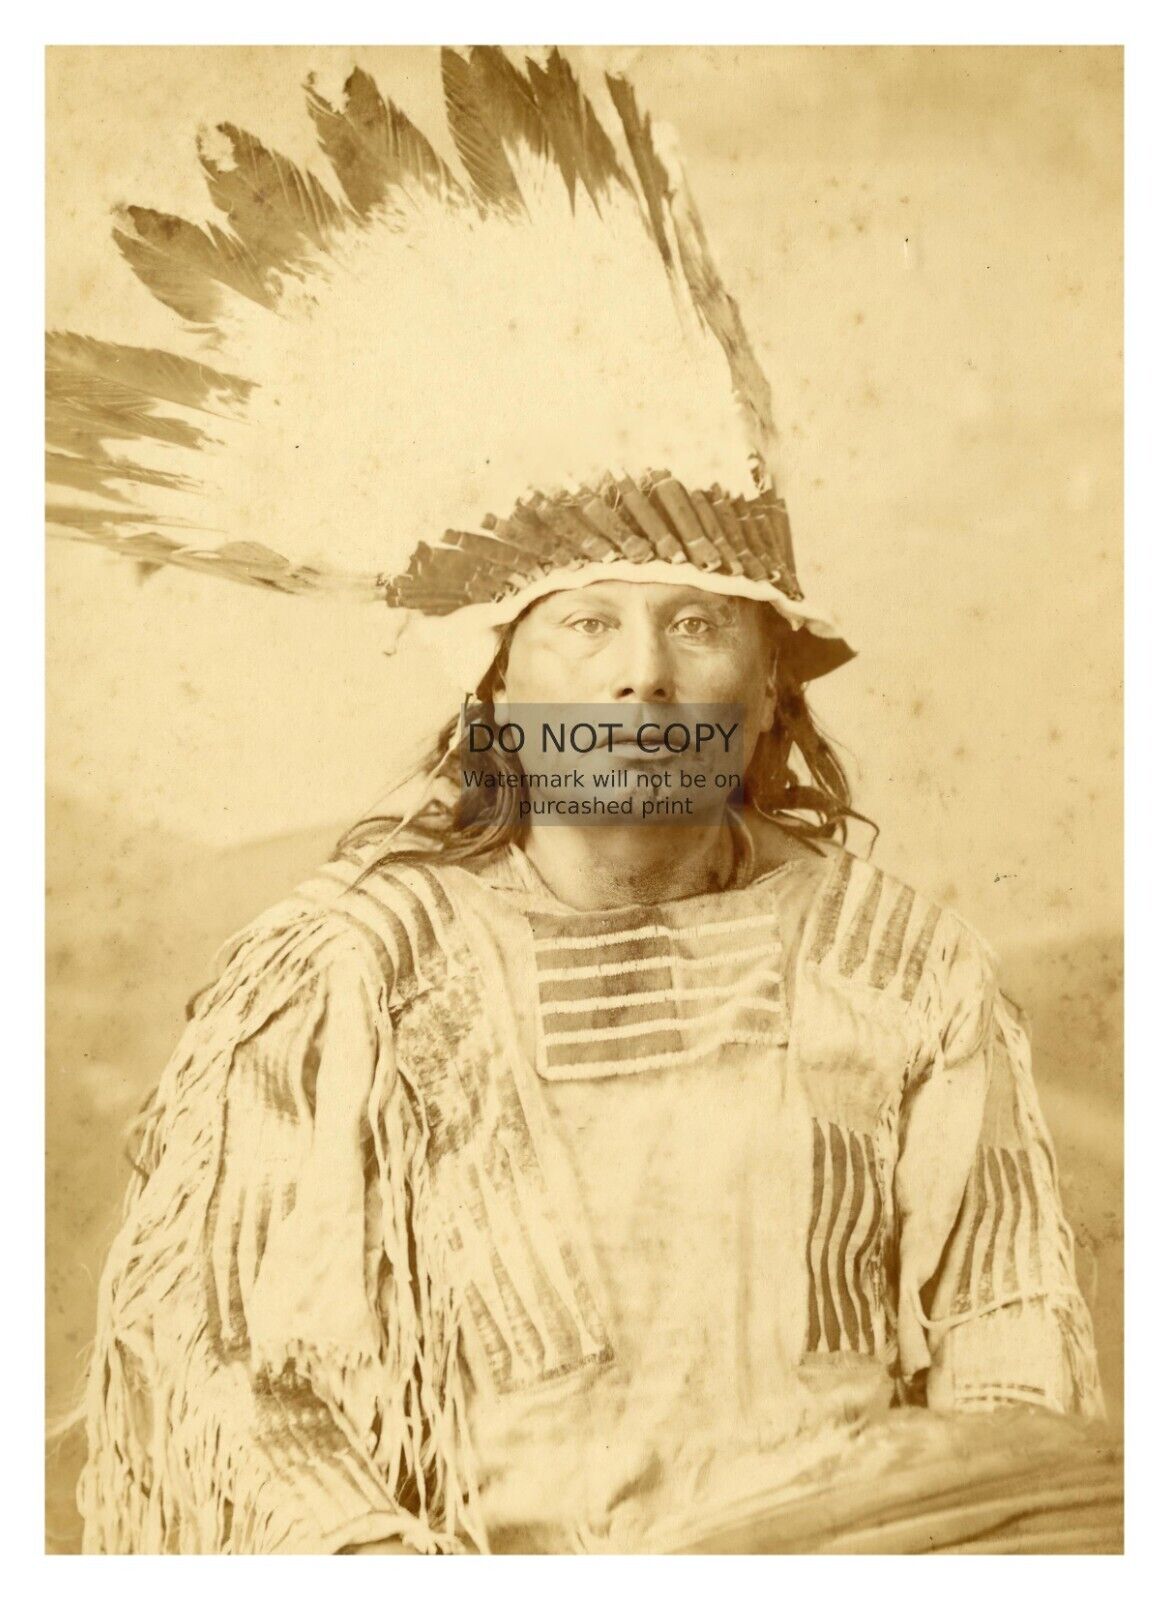 CHIEF GALL NATIVE AMERICAN CHEIF SURVIVOR OF CUSTERS LAST STAND 5X7 PHOTO